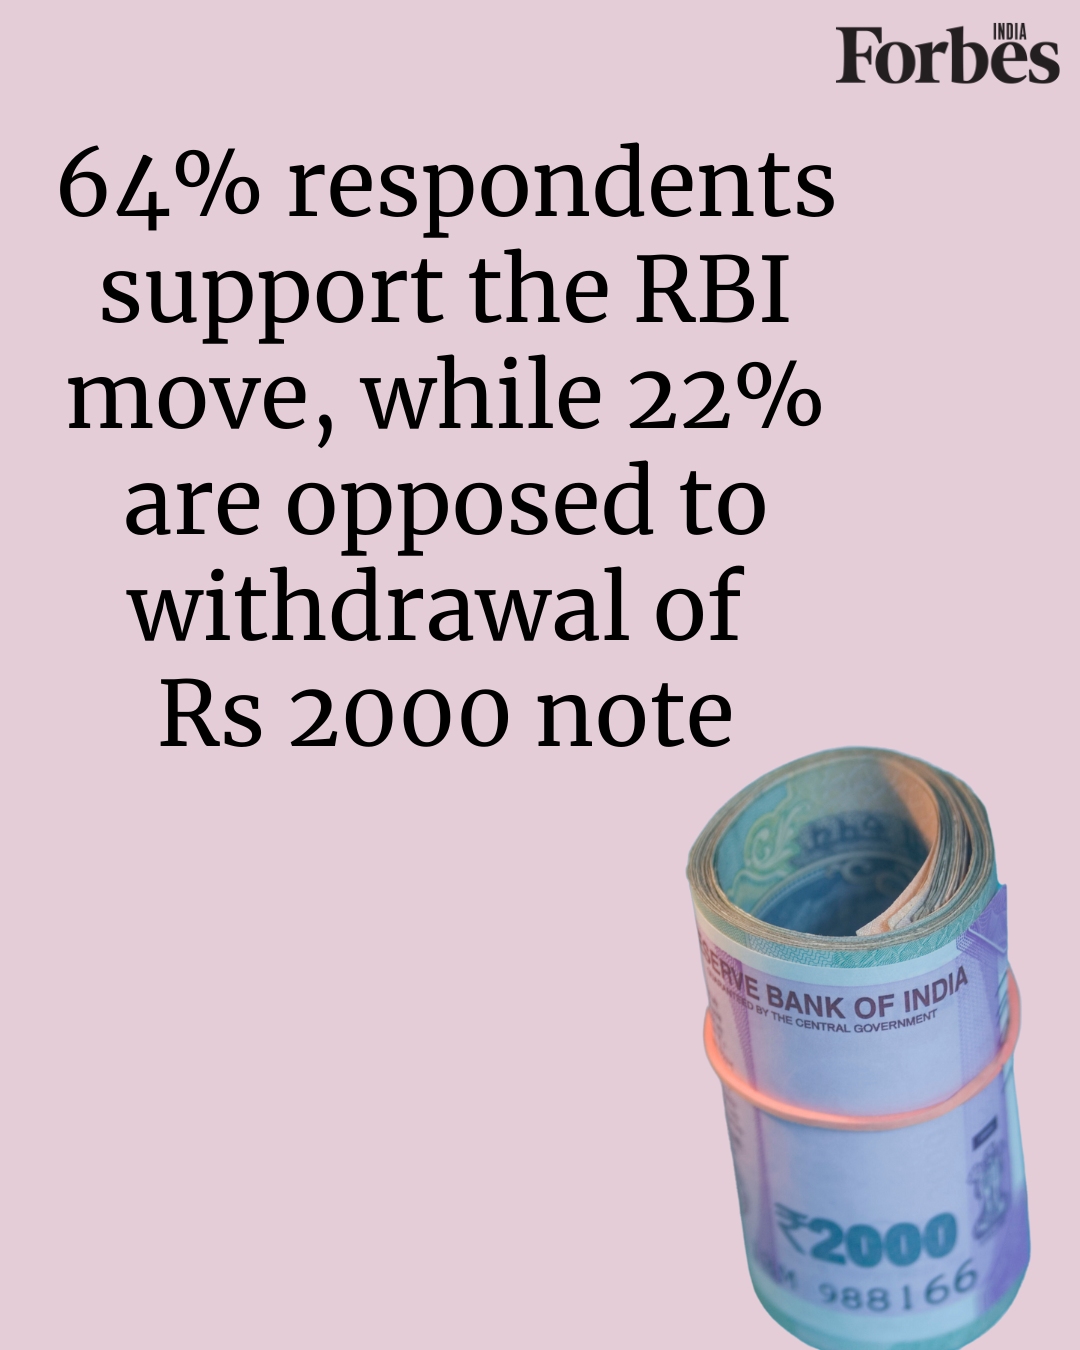 2 in 3 citizens support withdrawal of the Rs 2000 note: survey